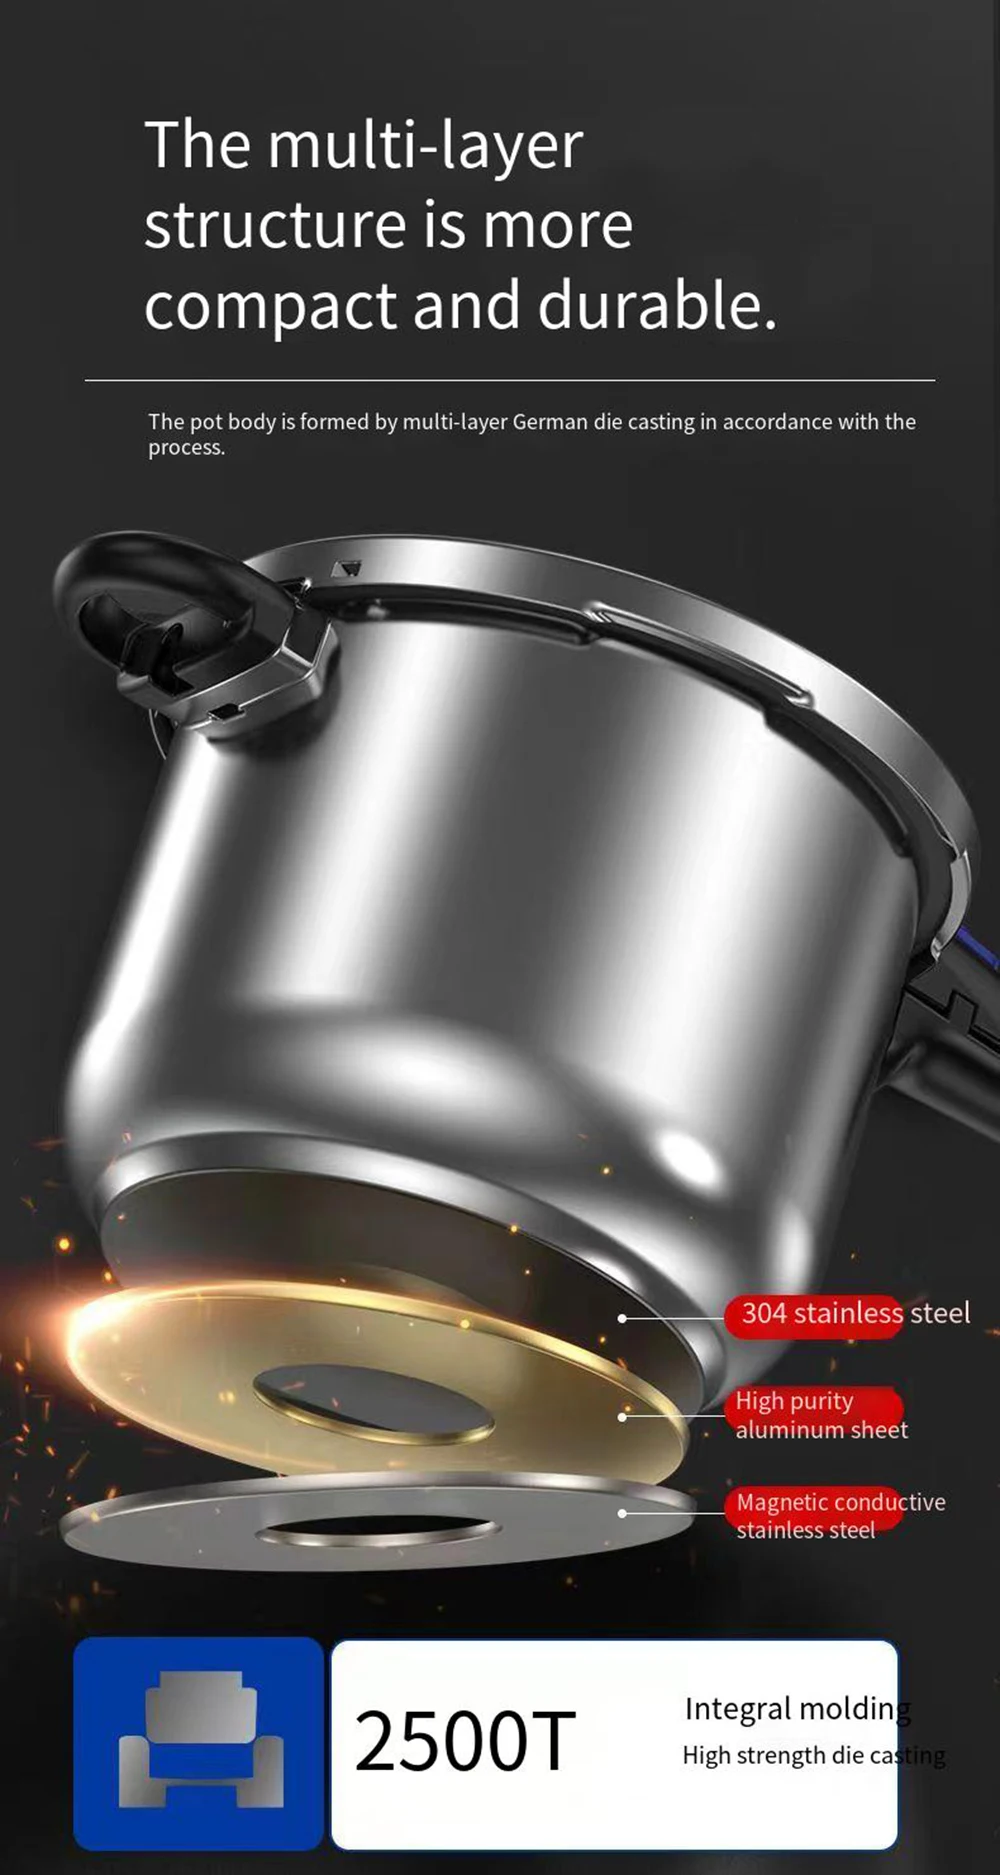 https://ae01.alicdn.com/kf/Sce37afc7e1ed44ddac6931efc4b717a2h/High-Quality-Pressure-Cooker-304-Explosion-Proof-Stainless-Steel-Pressure-Cooker-Household-Gas-Induction-Cooker-Universal.jpg